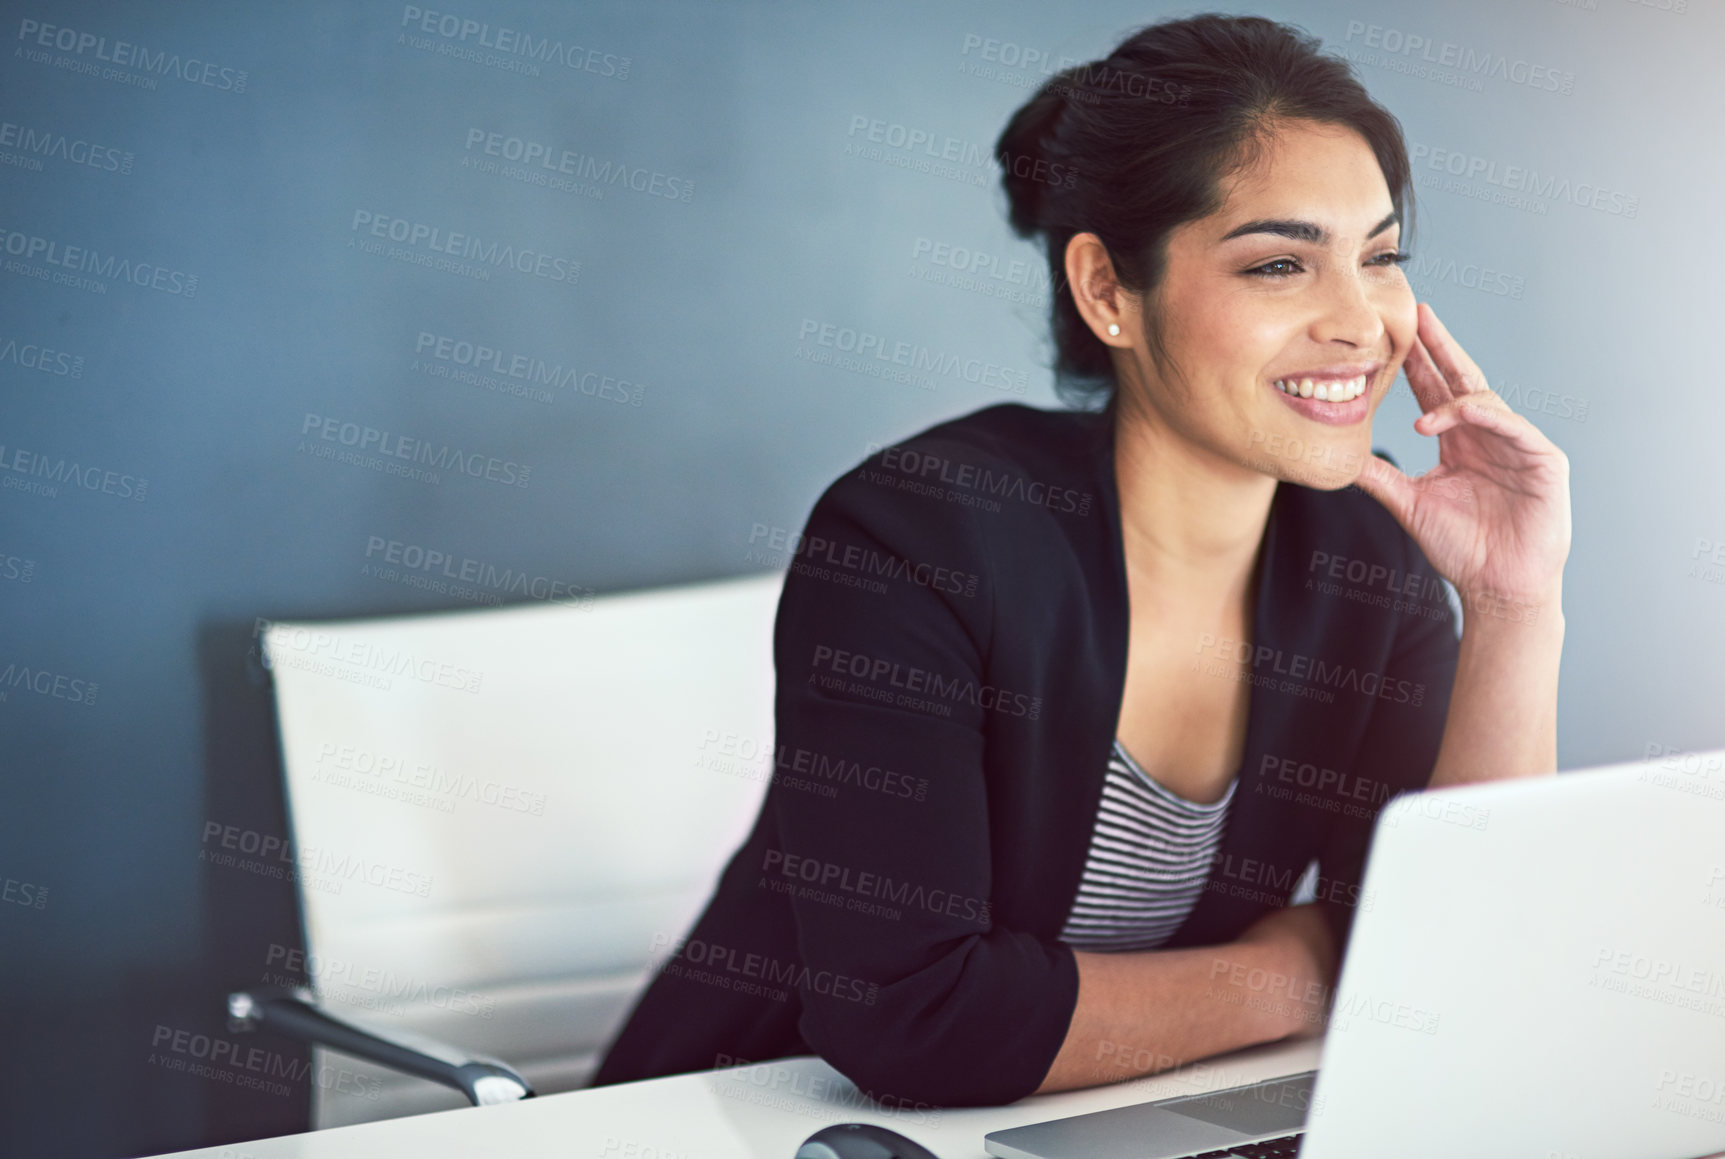 Buy stock photo Cropped shot of an attractive young businesswoman looking thoughtful while working on a laptop in her office